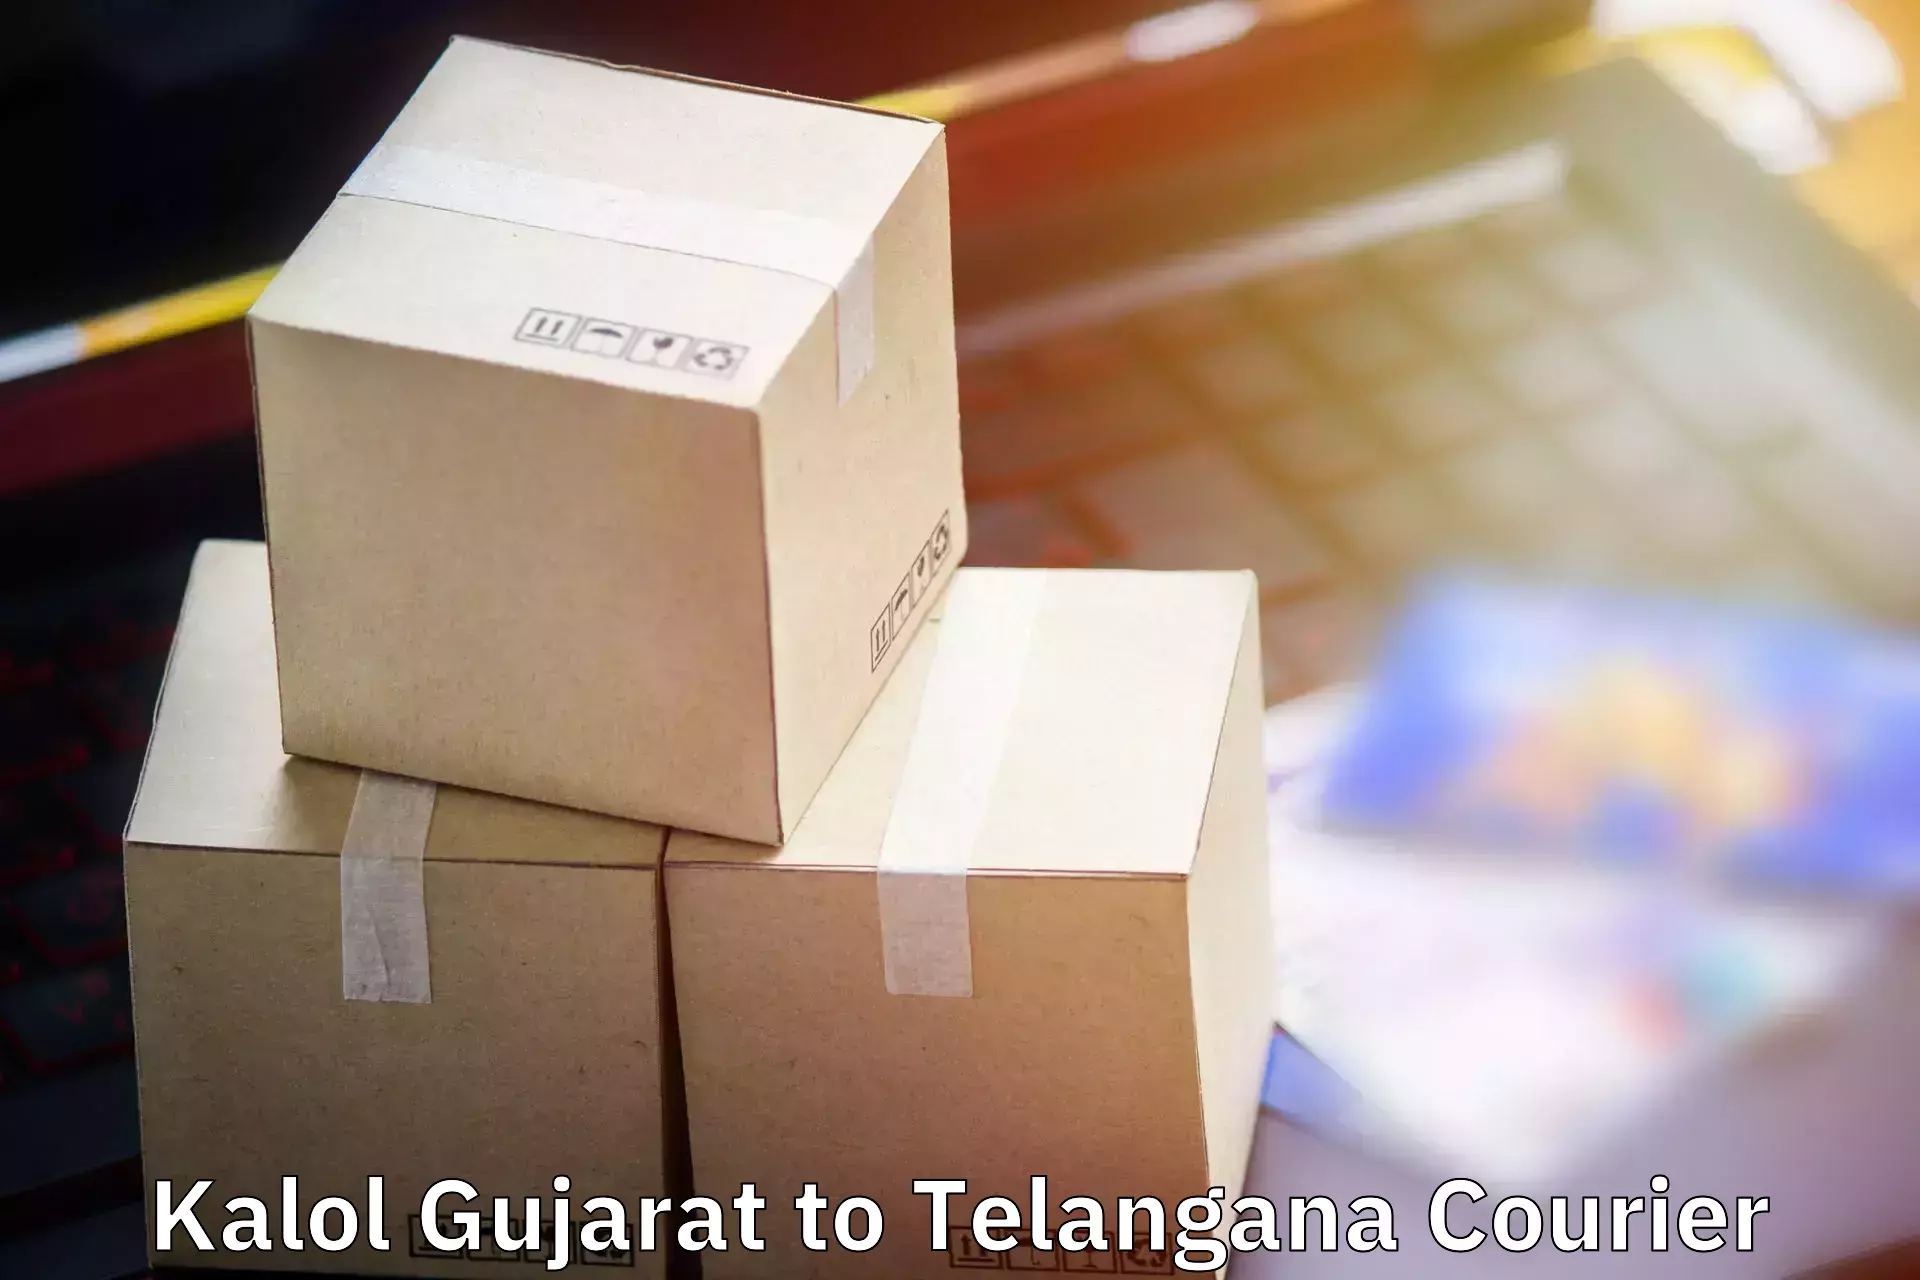 Personal luggage delivery Kalol Gujarat to Sultanabad